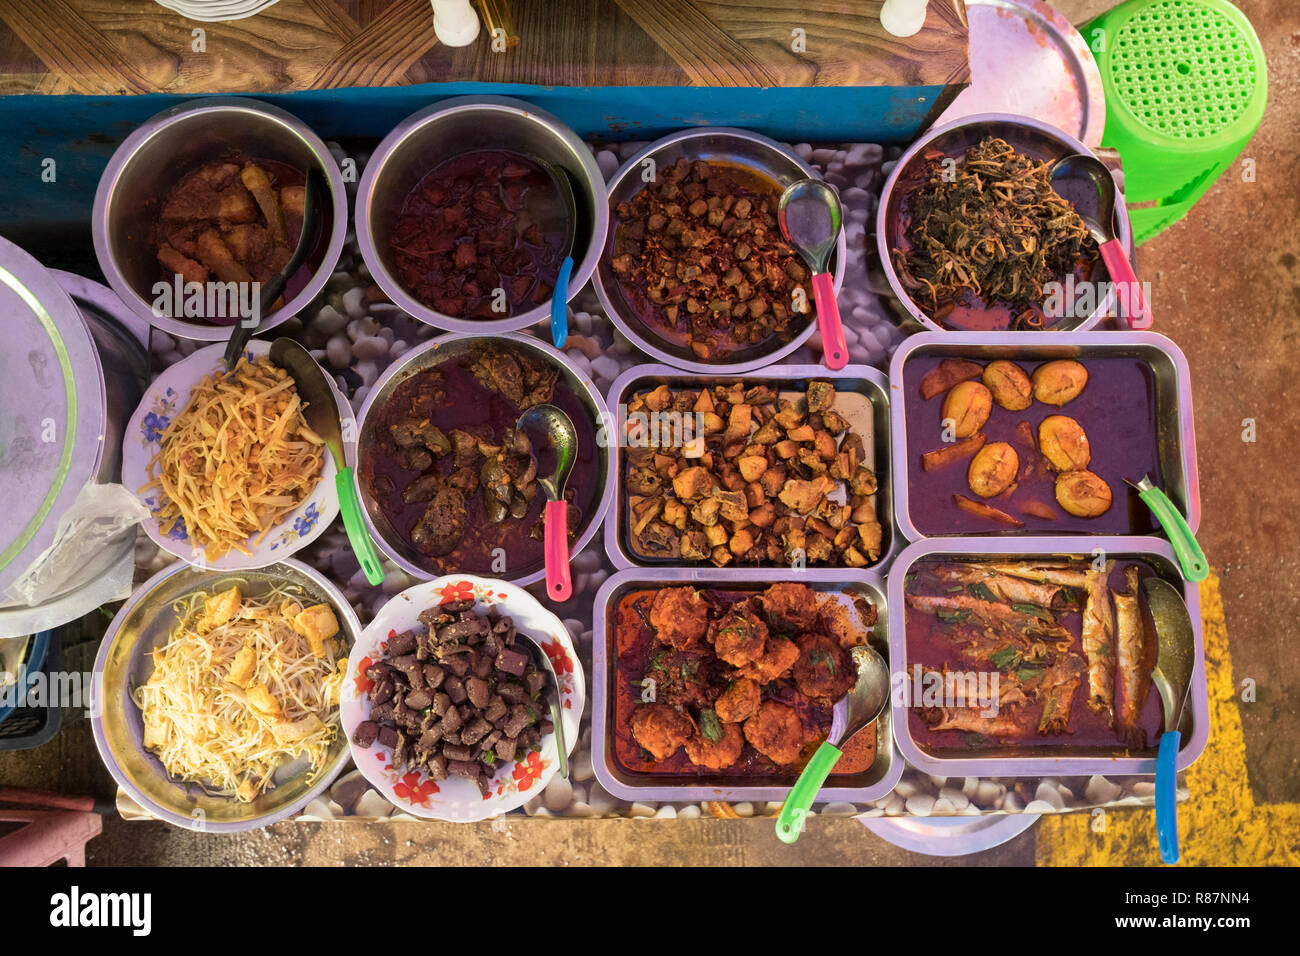 Typical Burmese food at a lunch stall in Yangon, Myanmar. Stock Photo